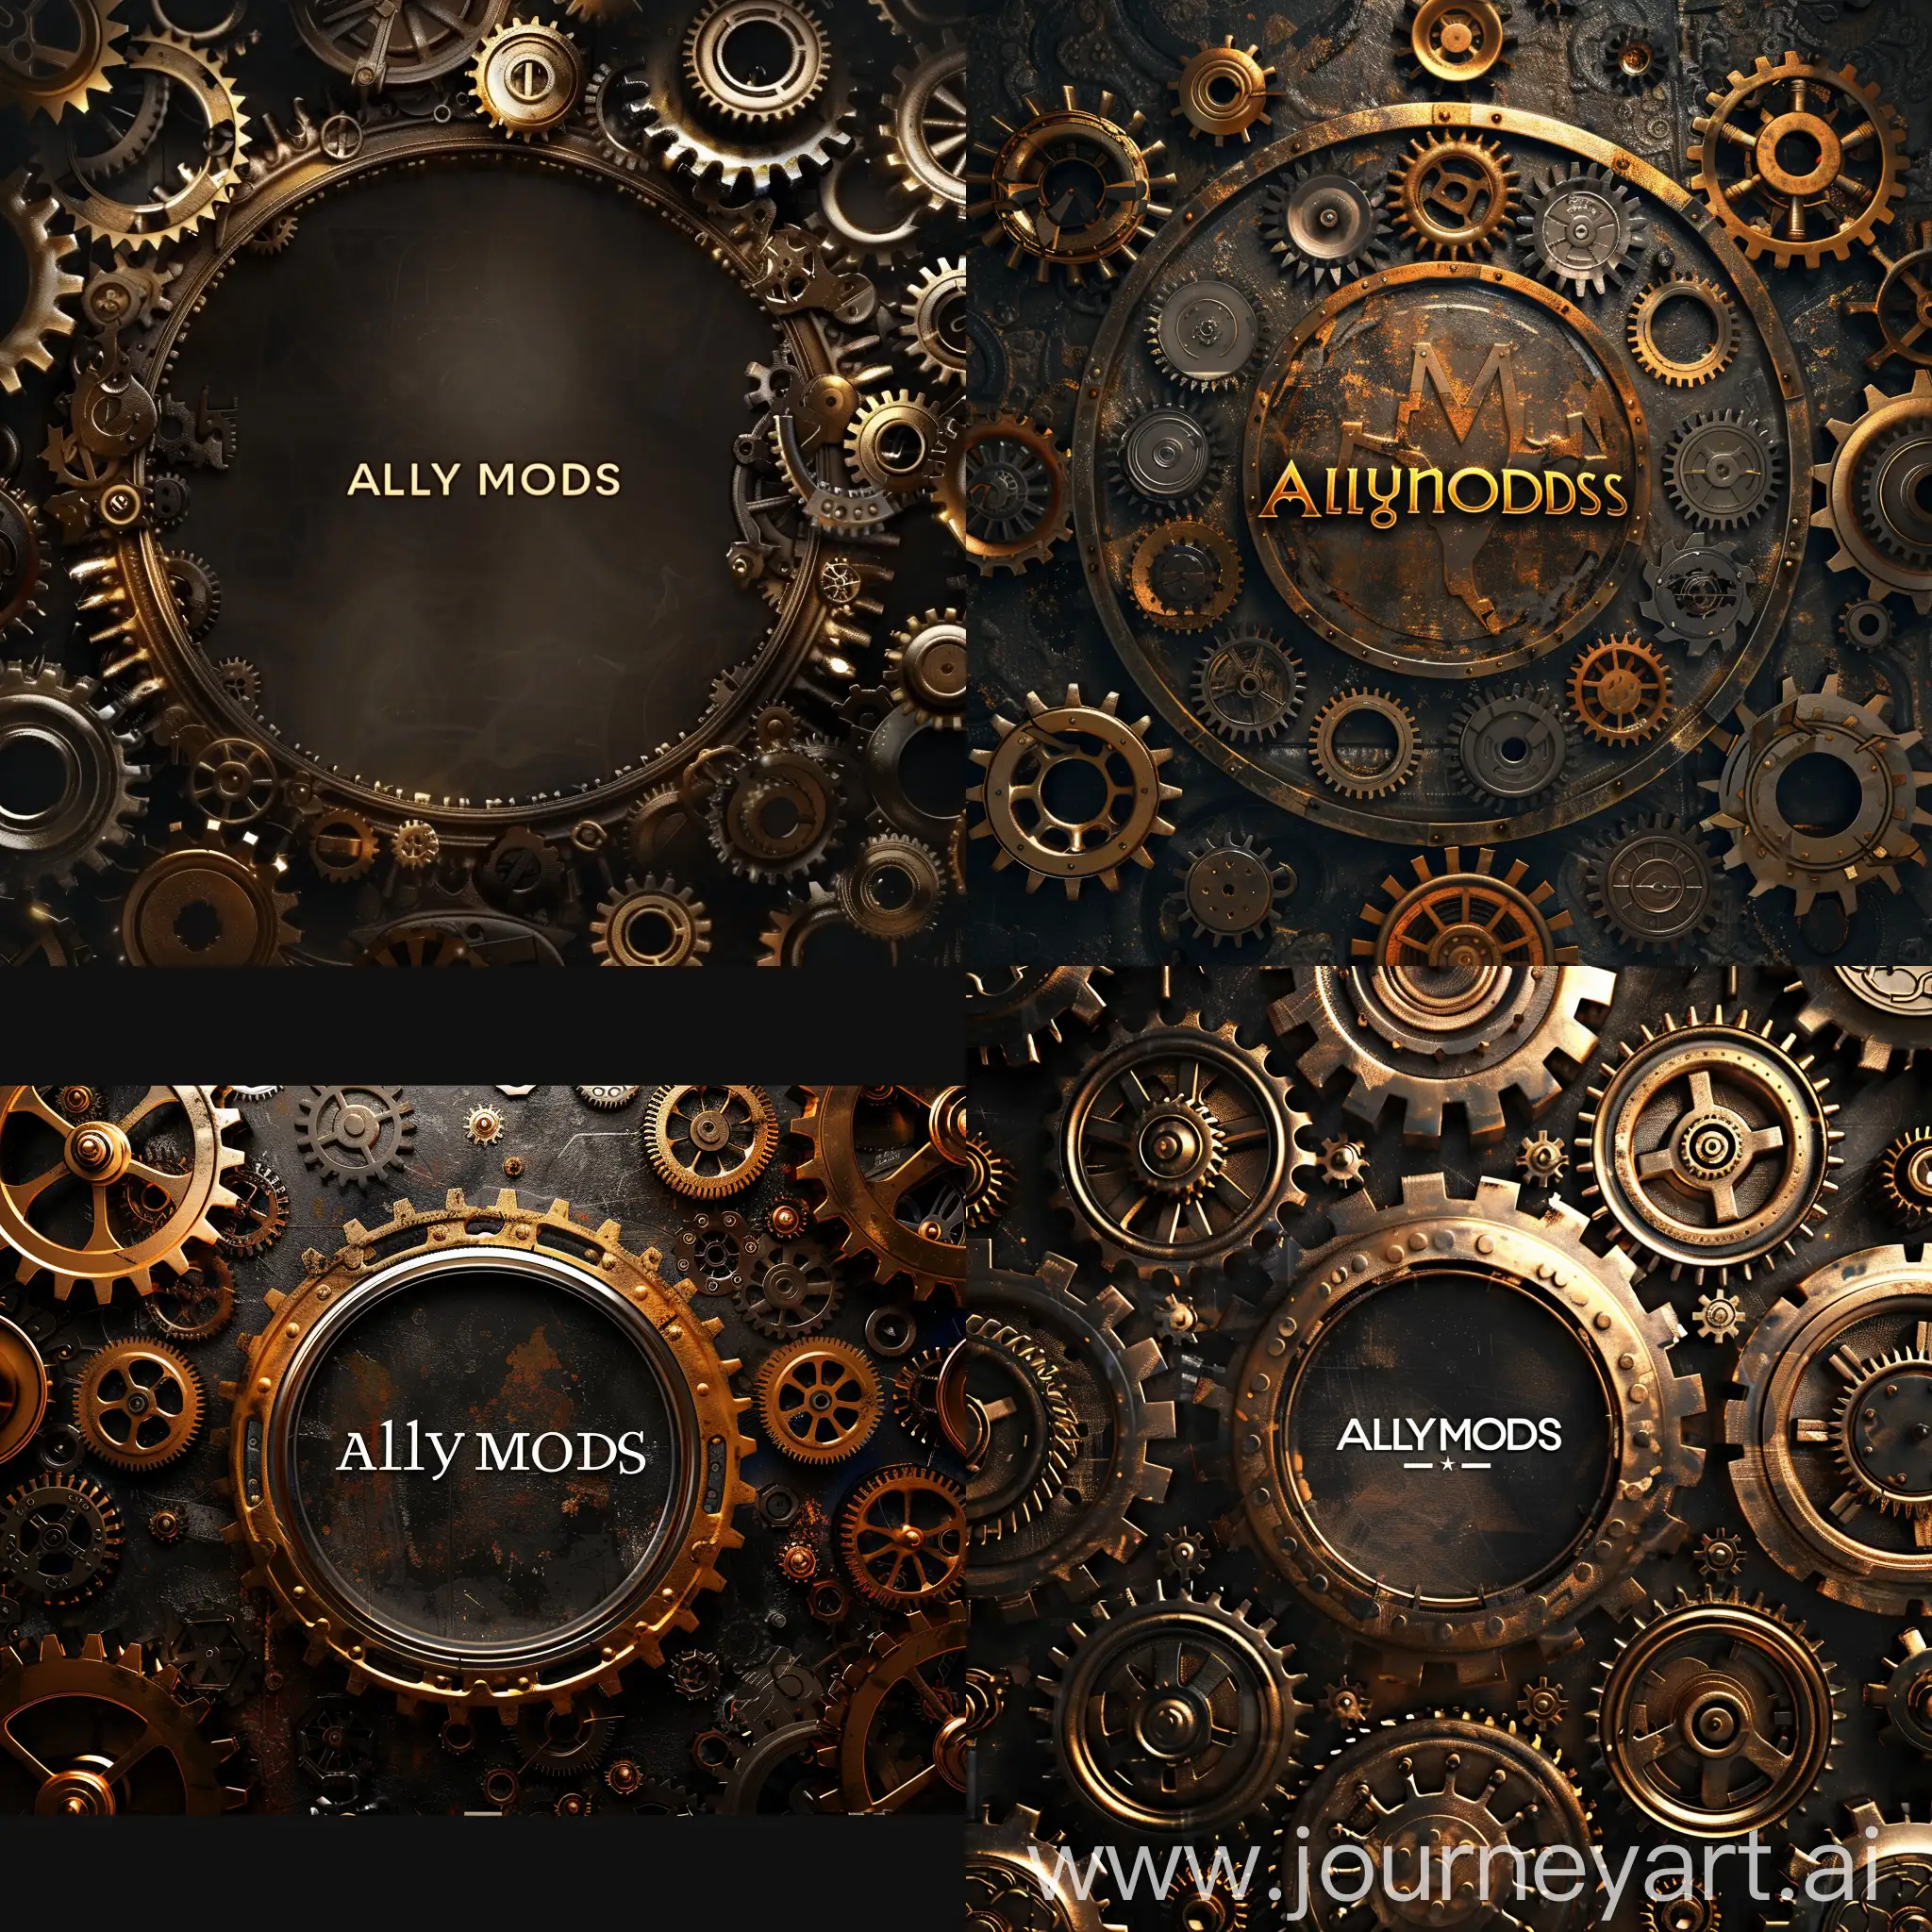 Create a website banner that is 350 pixels wide and 80 pixels tall. It must say AllyMods in the center. Surround it with steam punk style gears. Do not clutter it